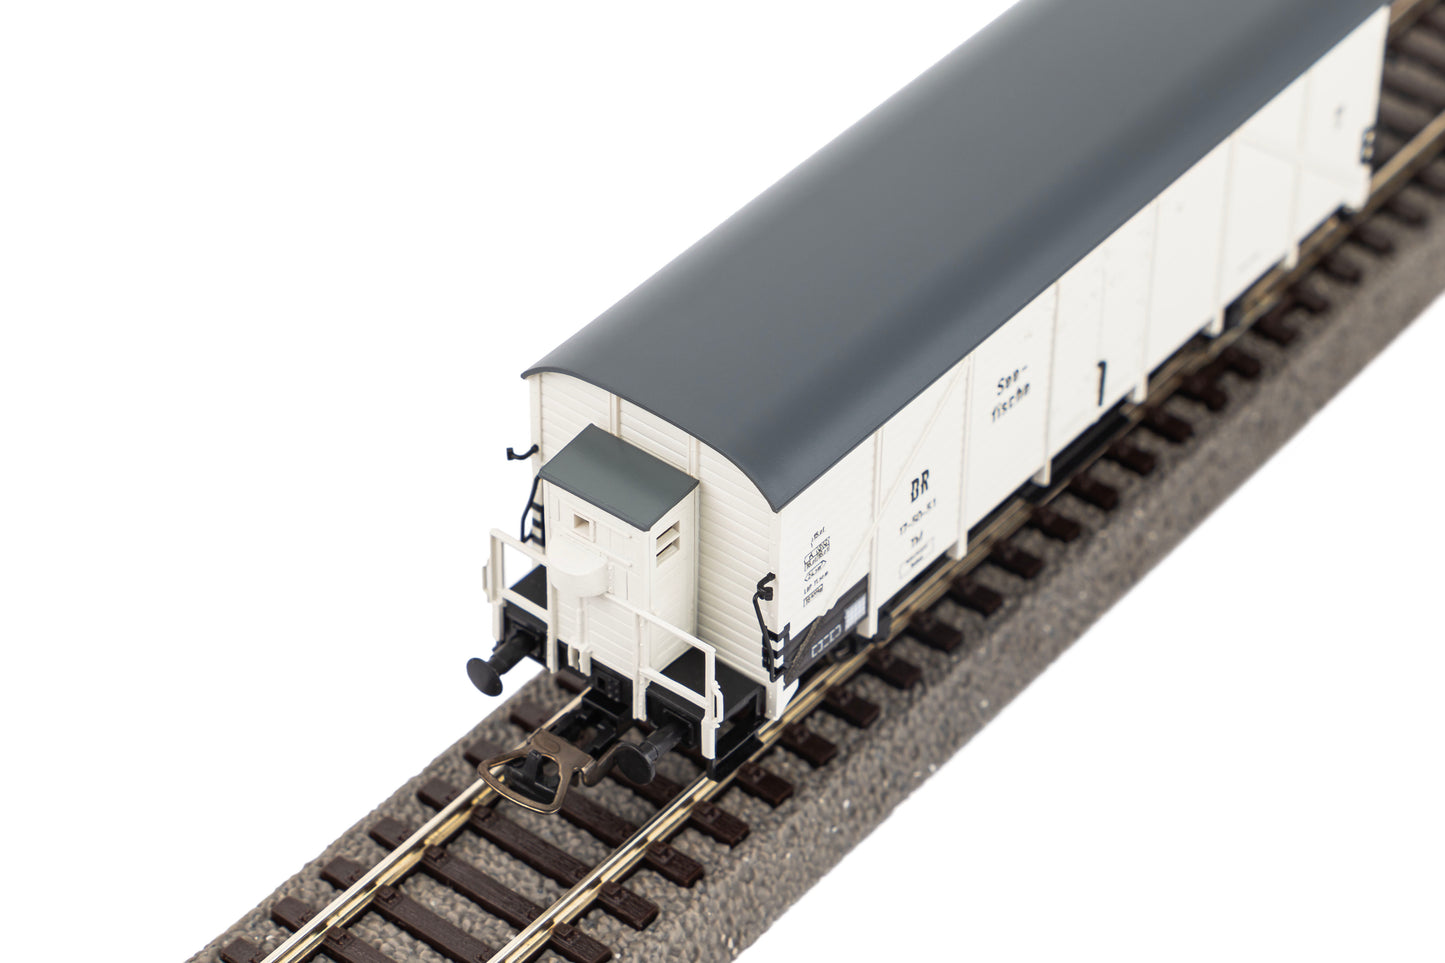 Piko 24506 - Refrigerated Freight Car Thf17 DR III